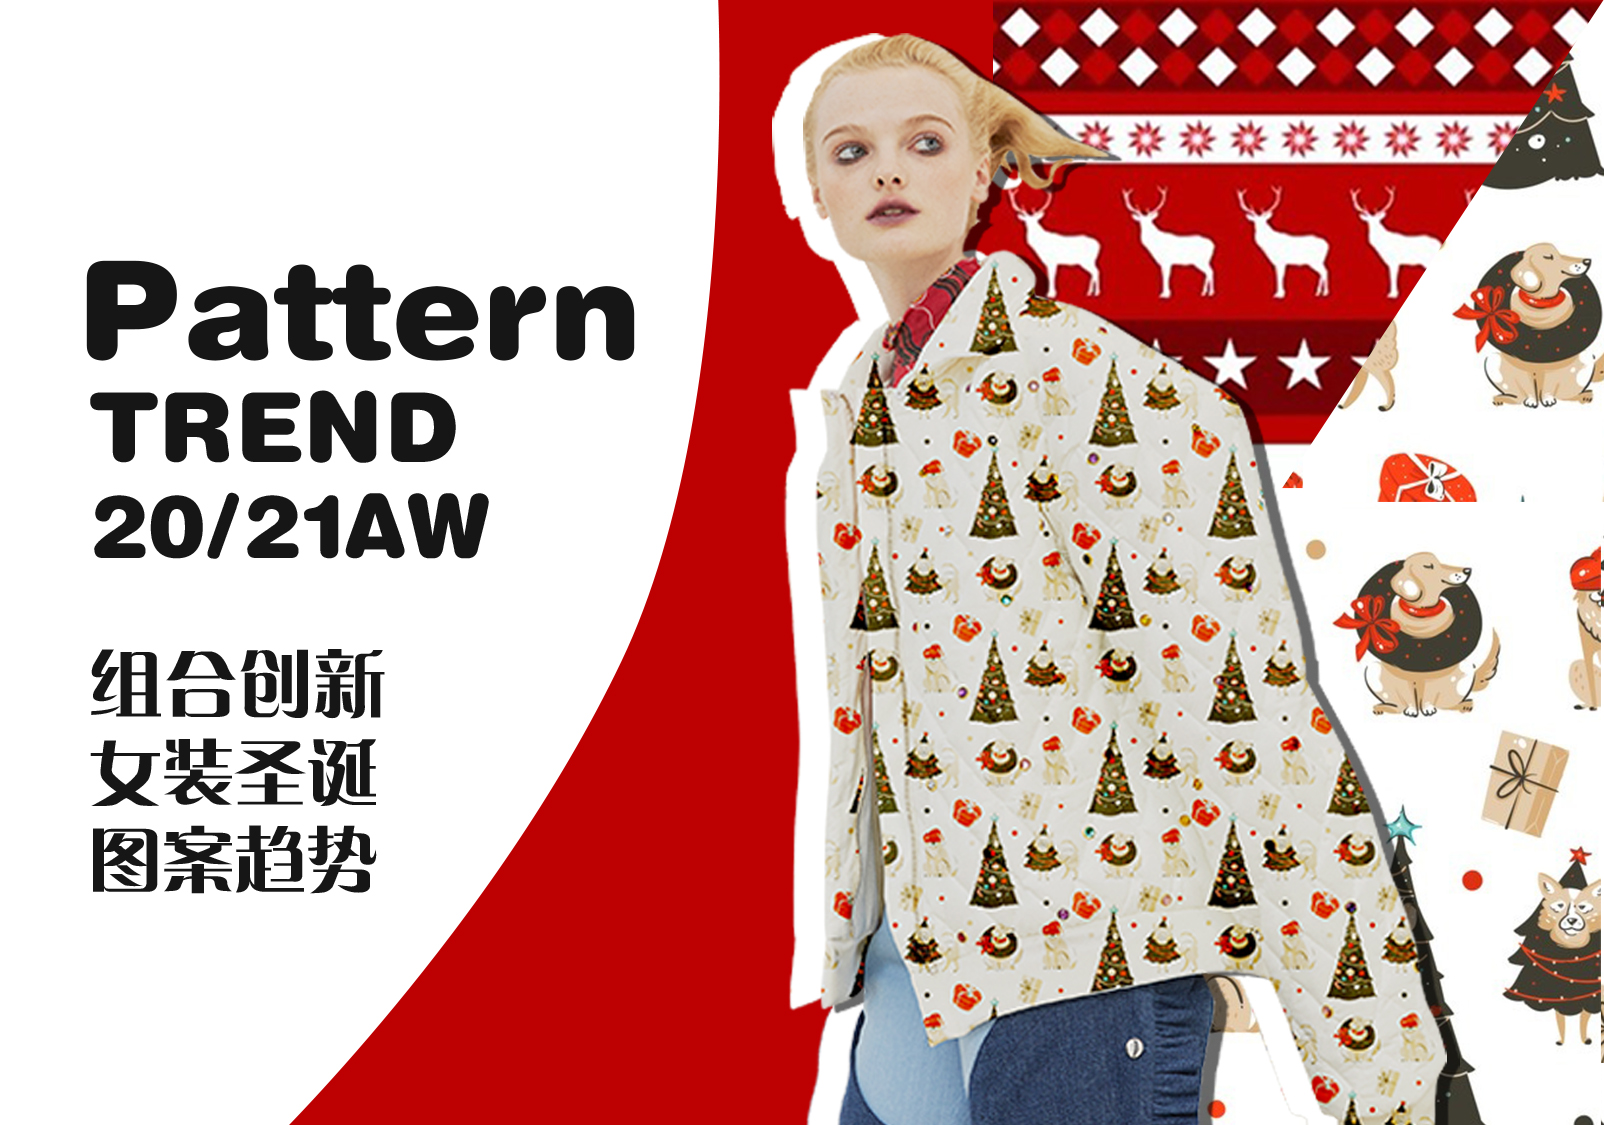 Novel Combinations -- The Christmas Pattern Trend for Womenswear